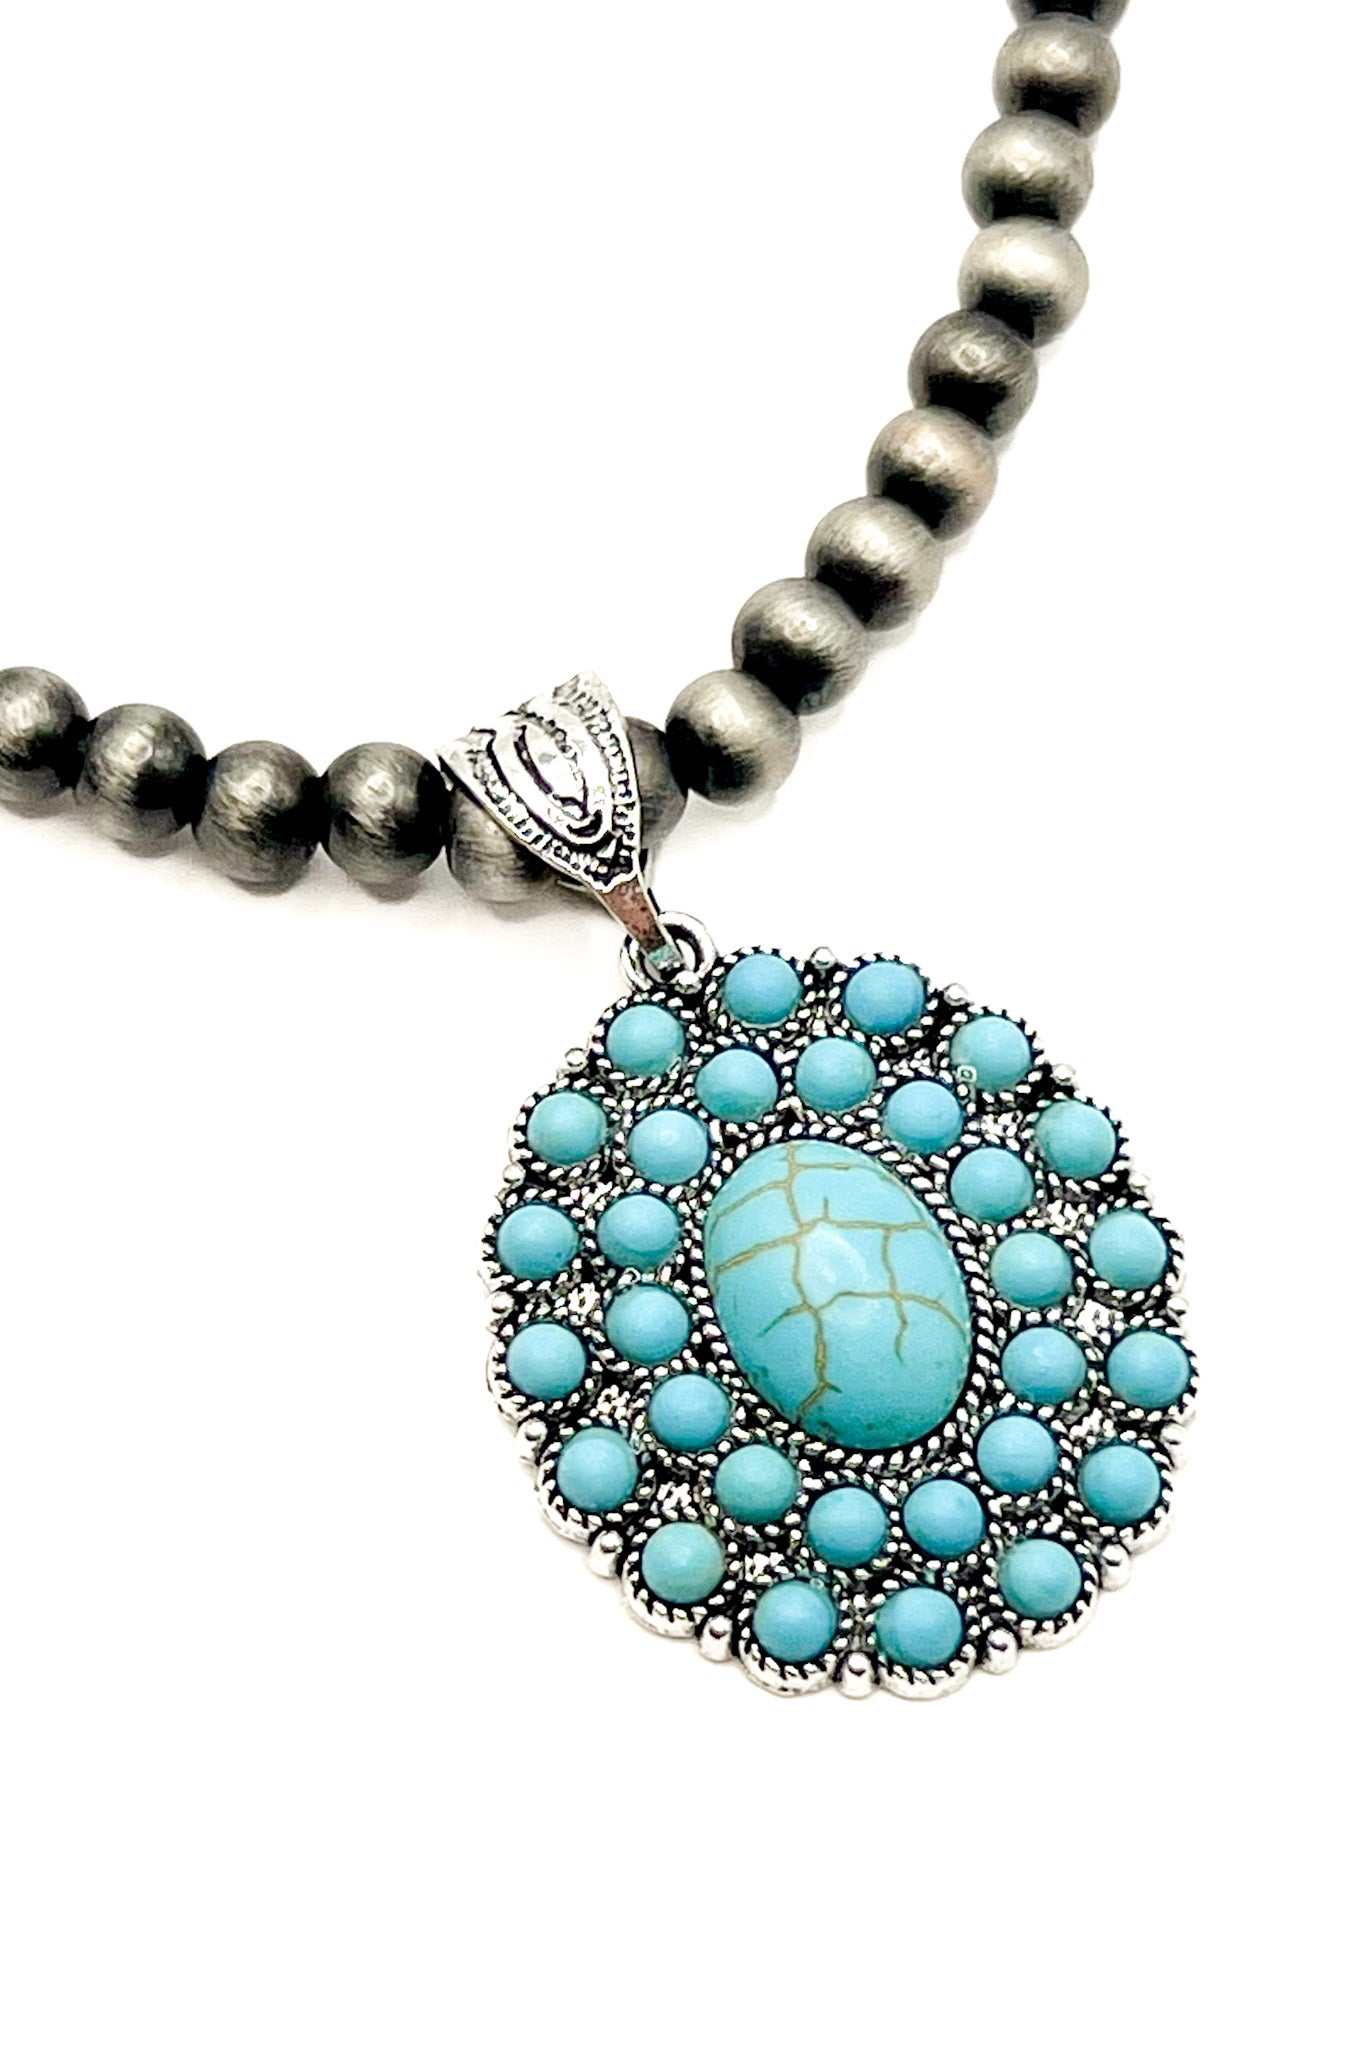 Antiqued Silver & Turquoise Stone Necklace Set